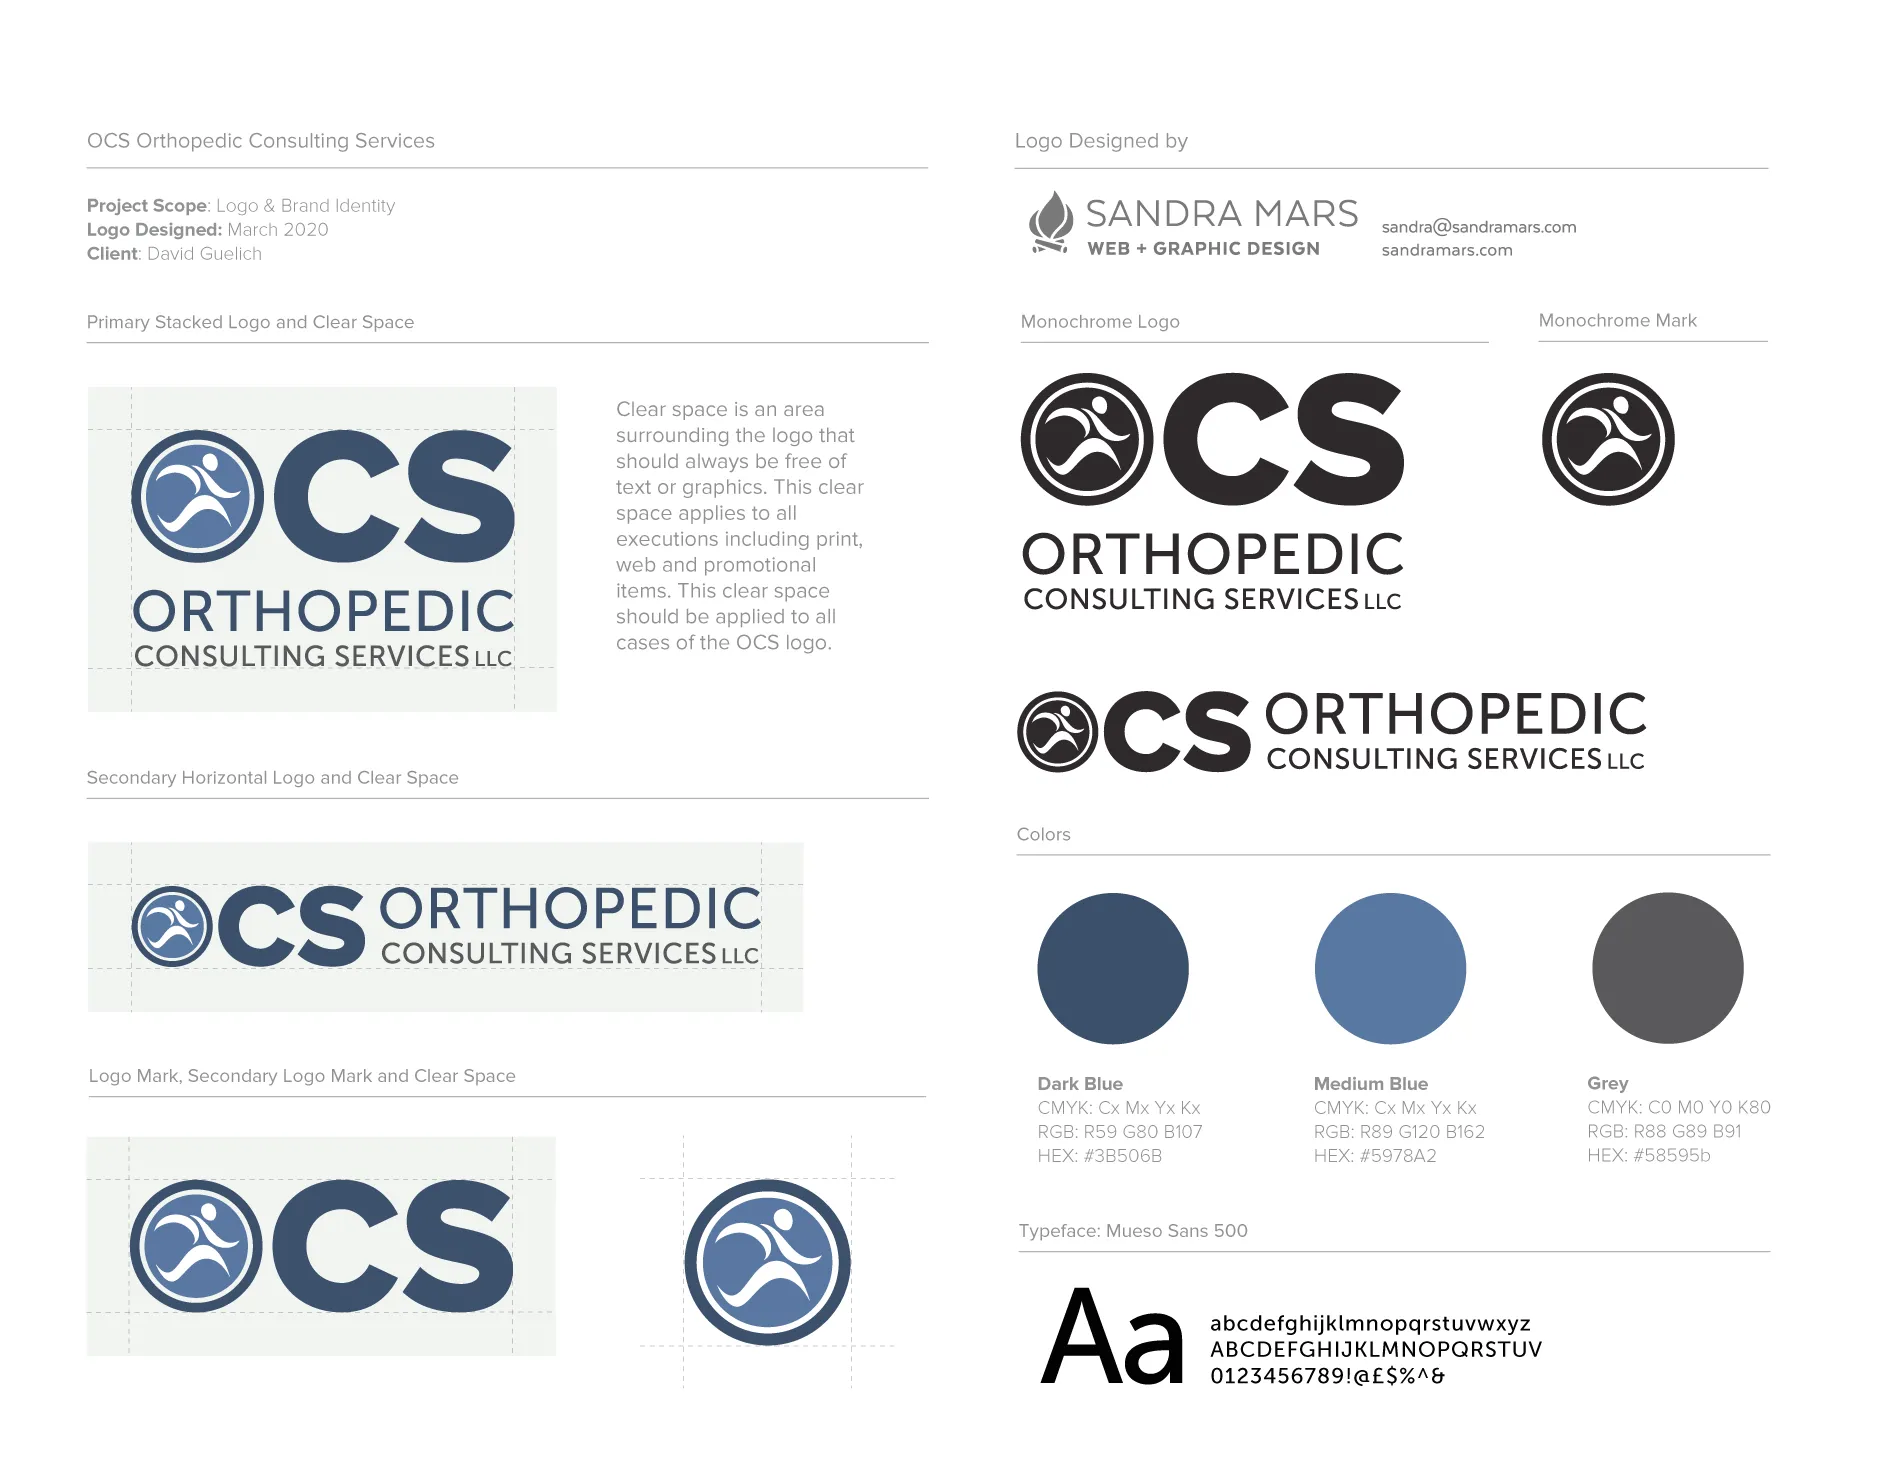 Orthopedic Consulting Services styleguide